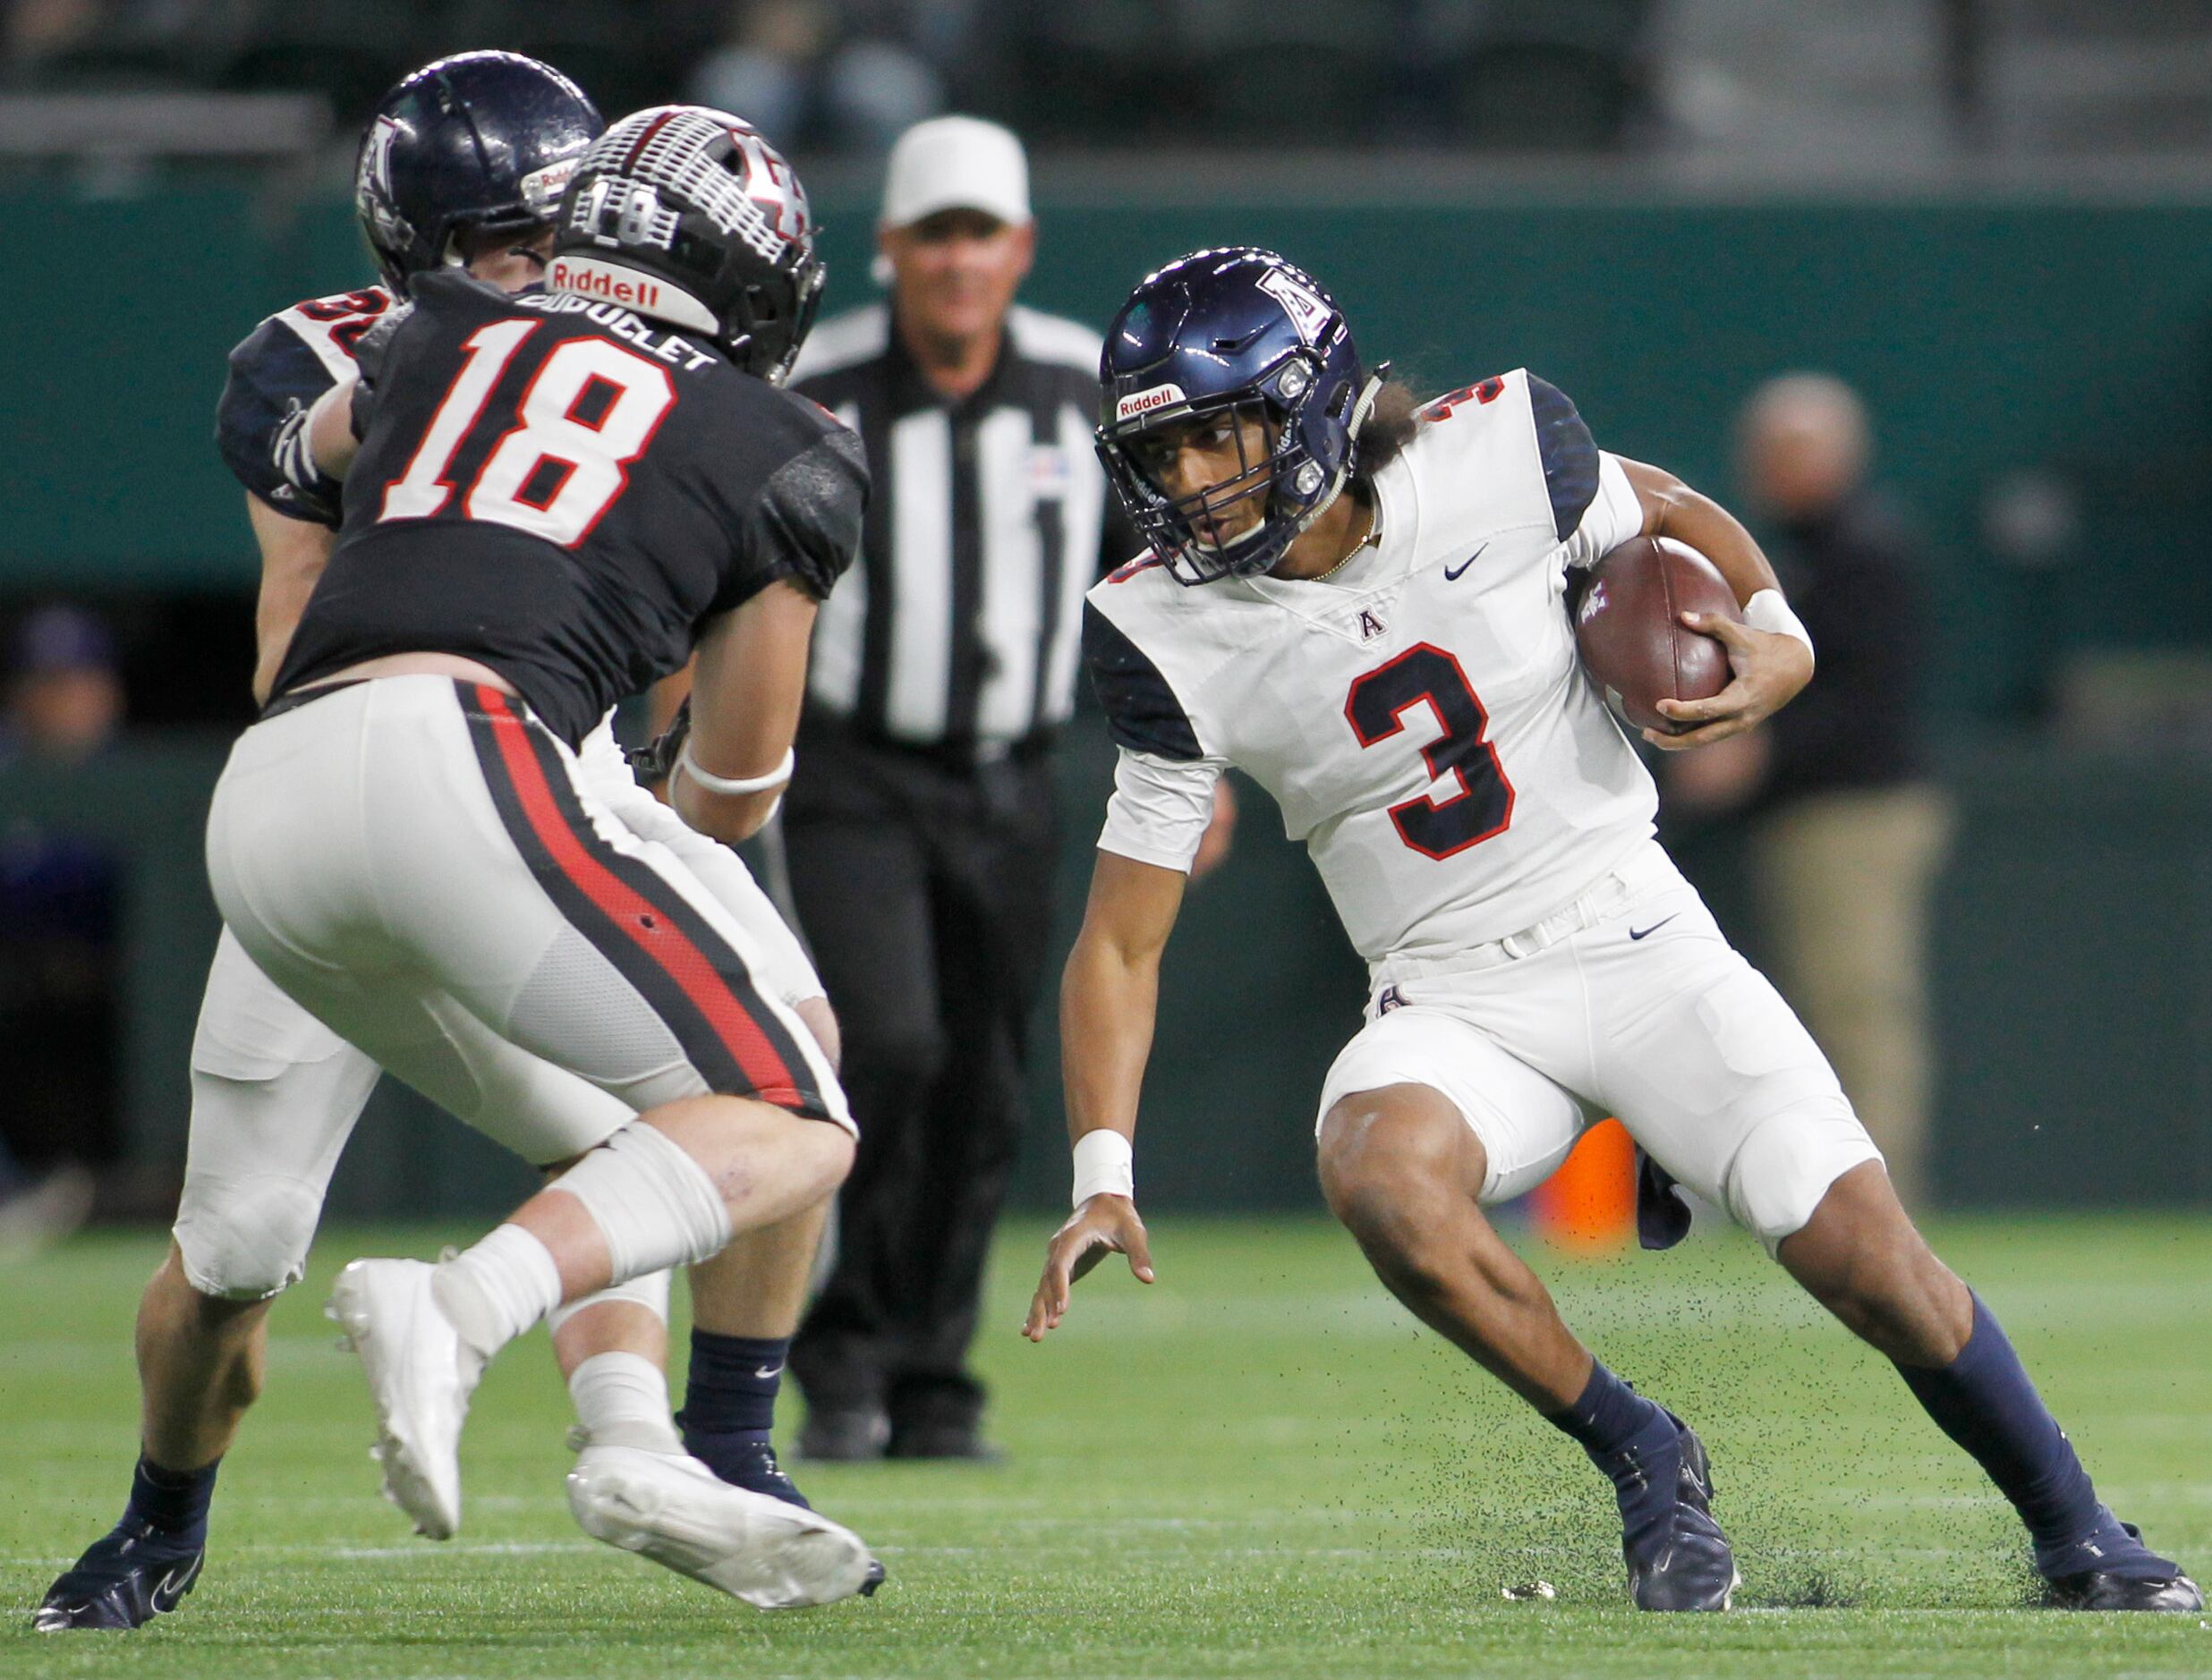 Allen quarterback makes a cut to avoid the pursuit of Lake Highlands linebacker Drew...